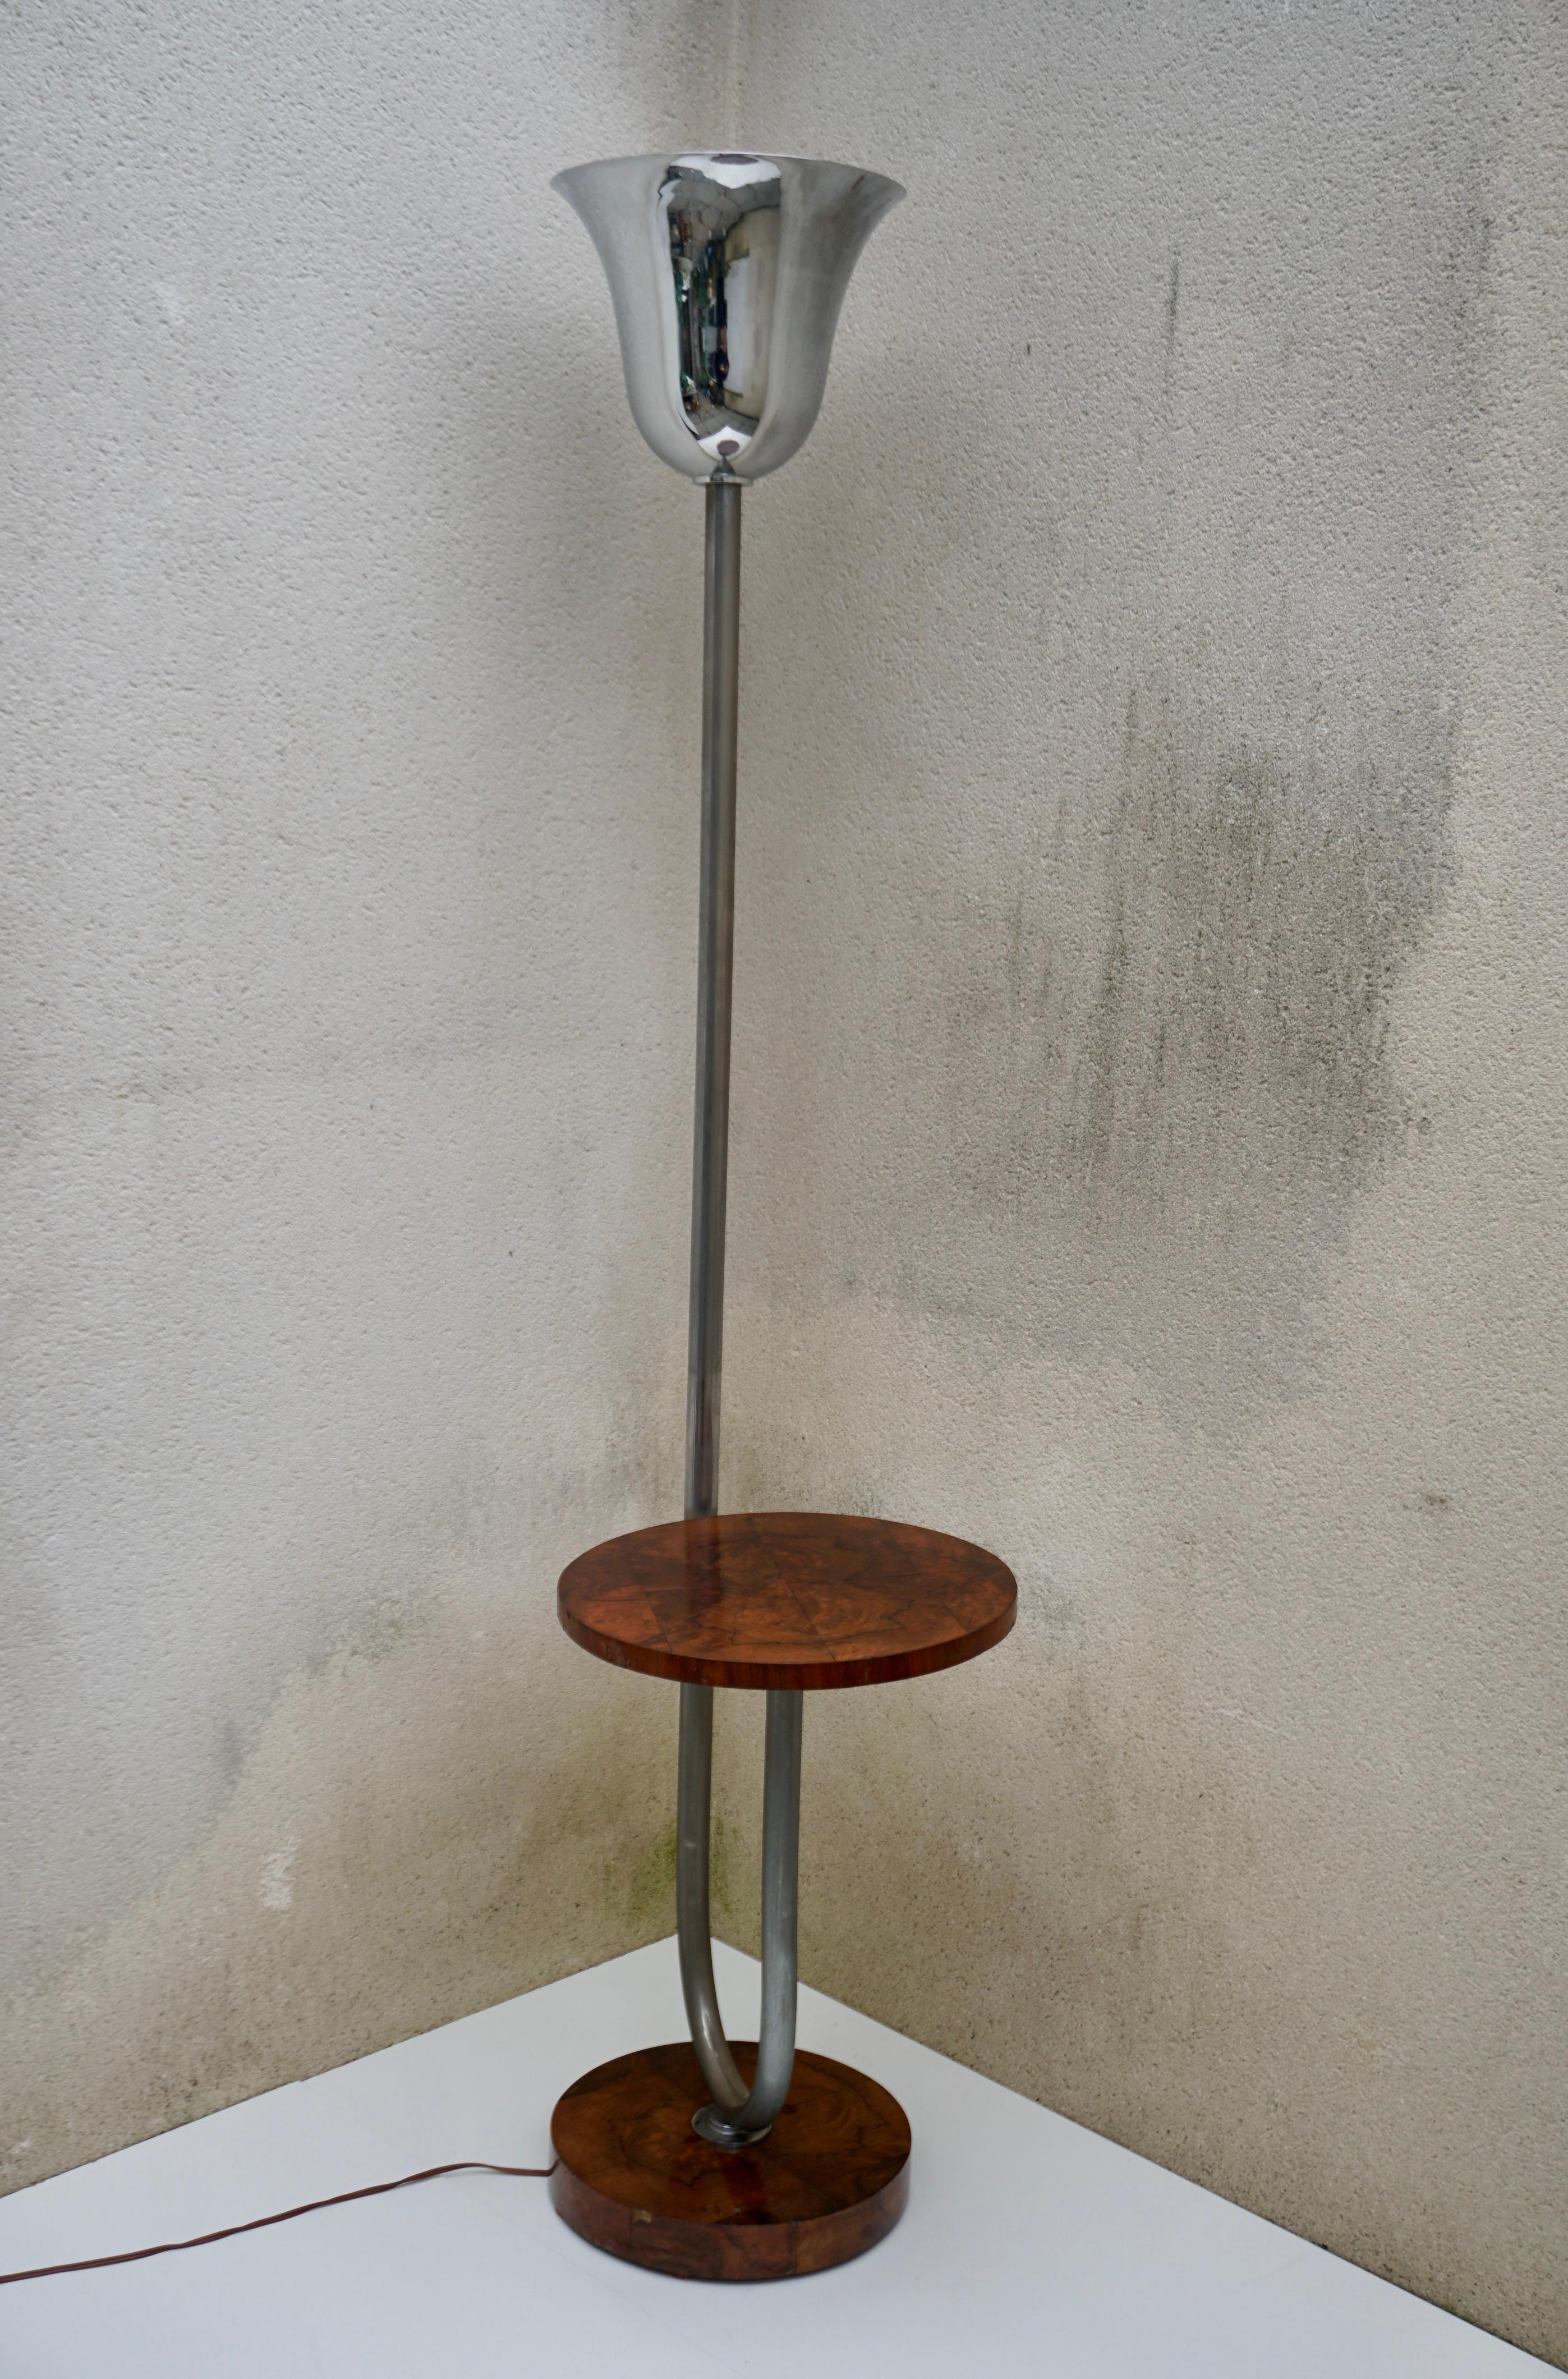 Elegant Art Deco floor lamp made of lacquered wood and chrome steel. 
The table has a walnut top with a chrome steel leg and base.

Table height 23.2